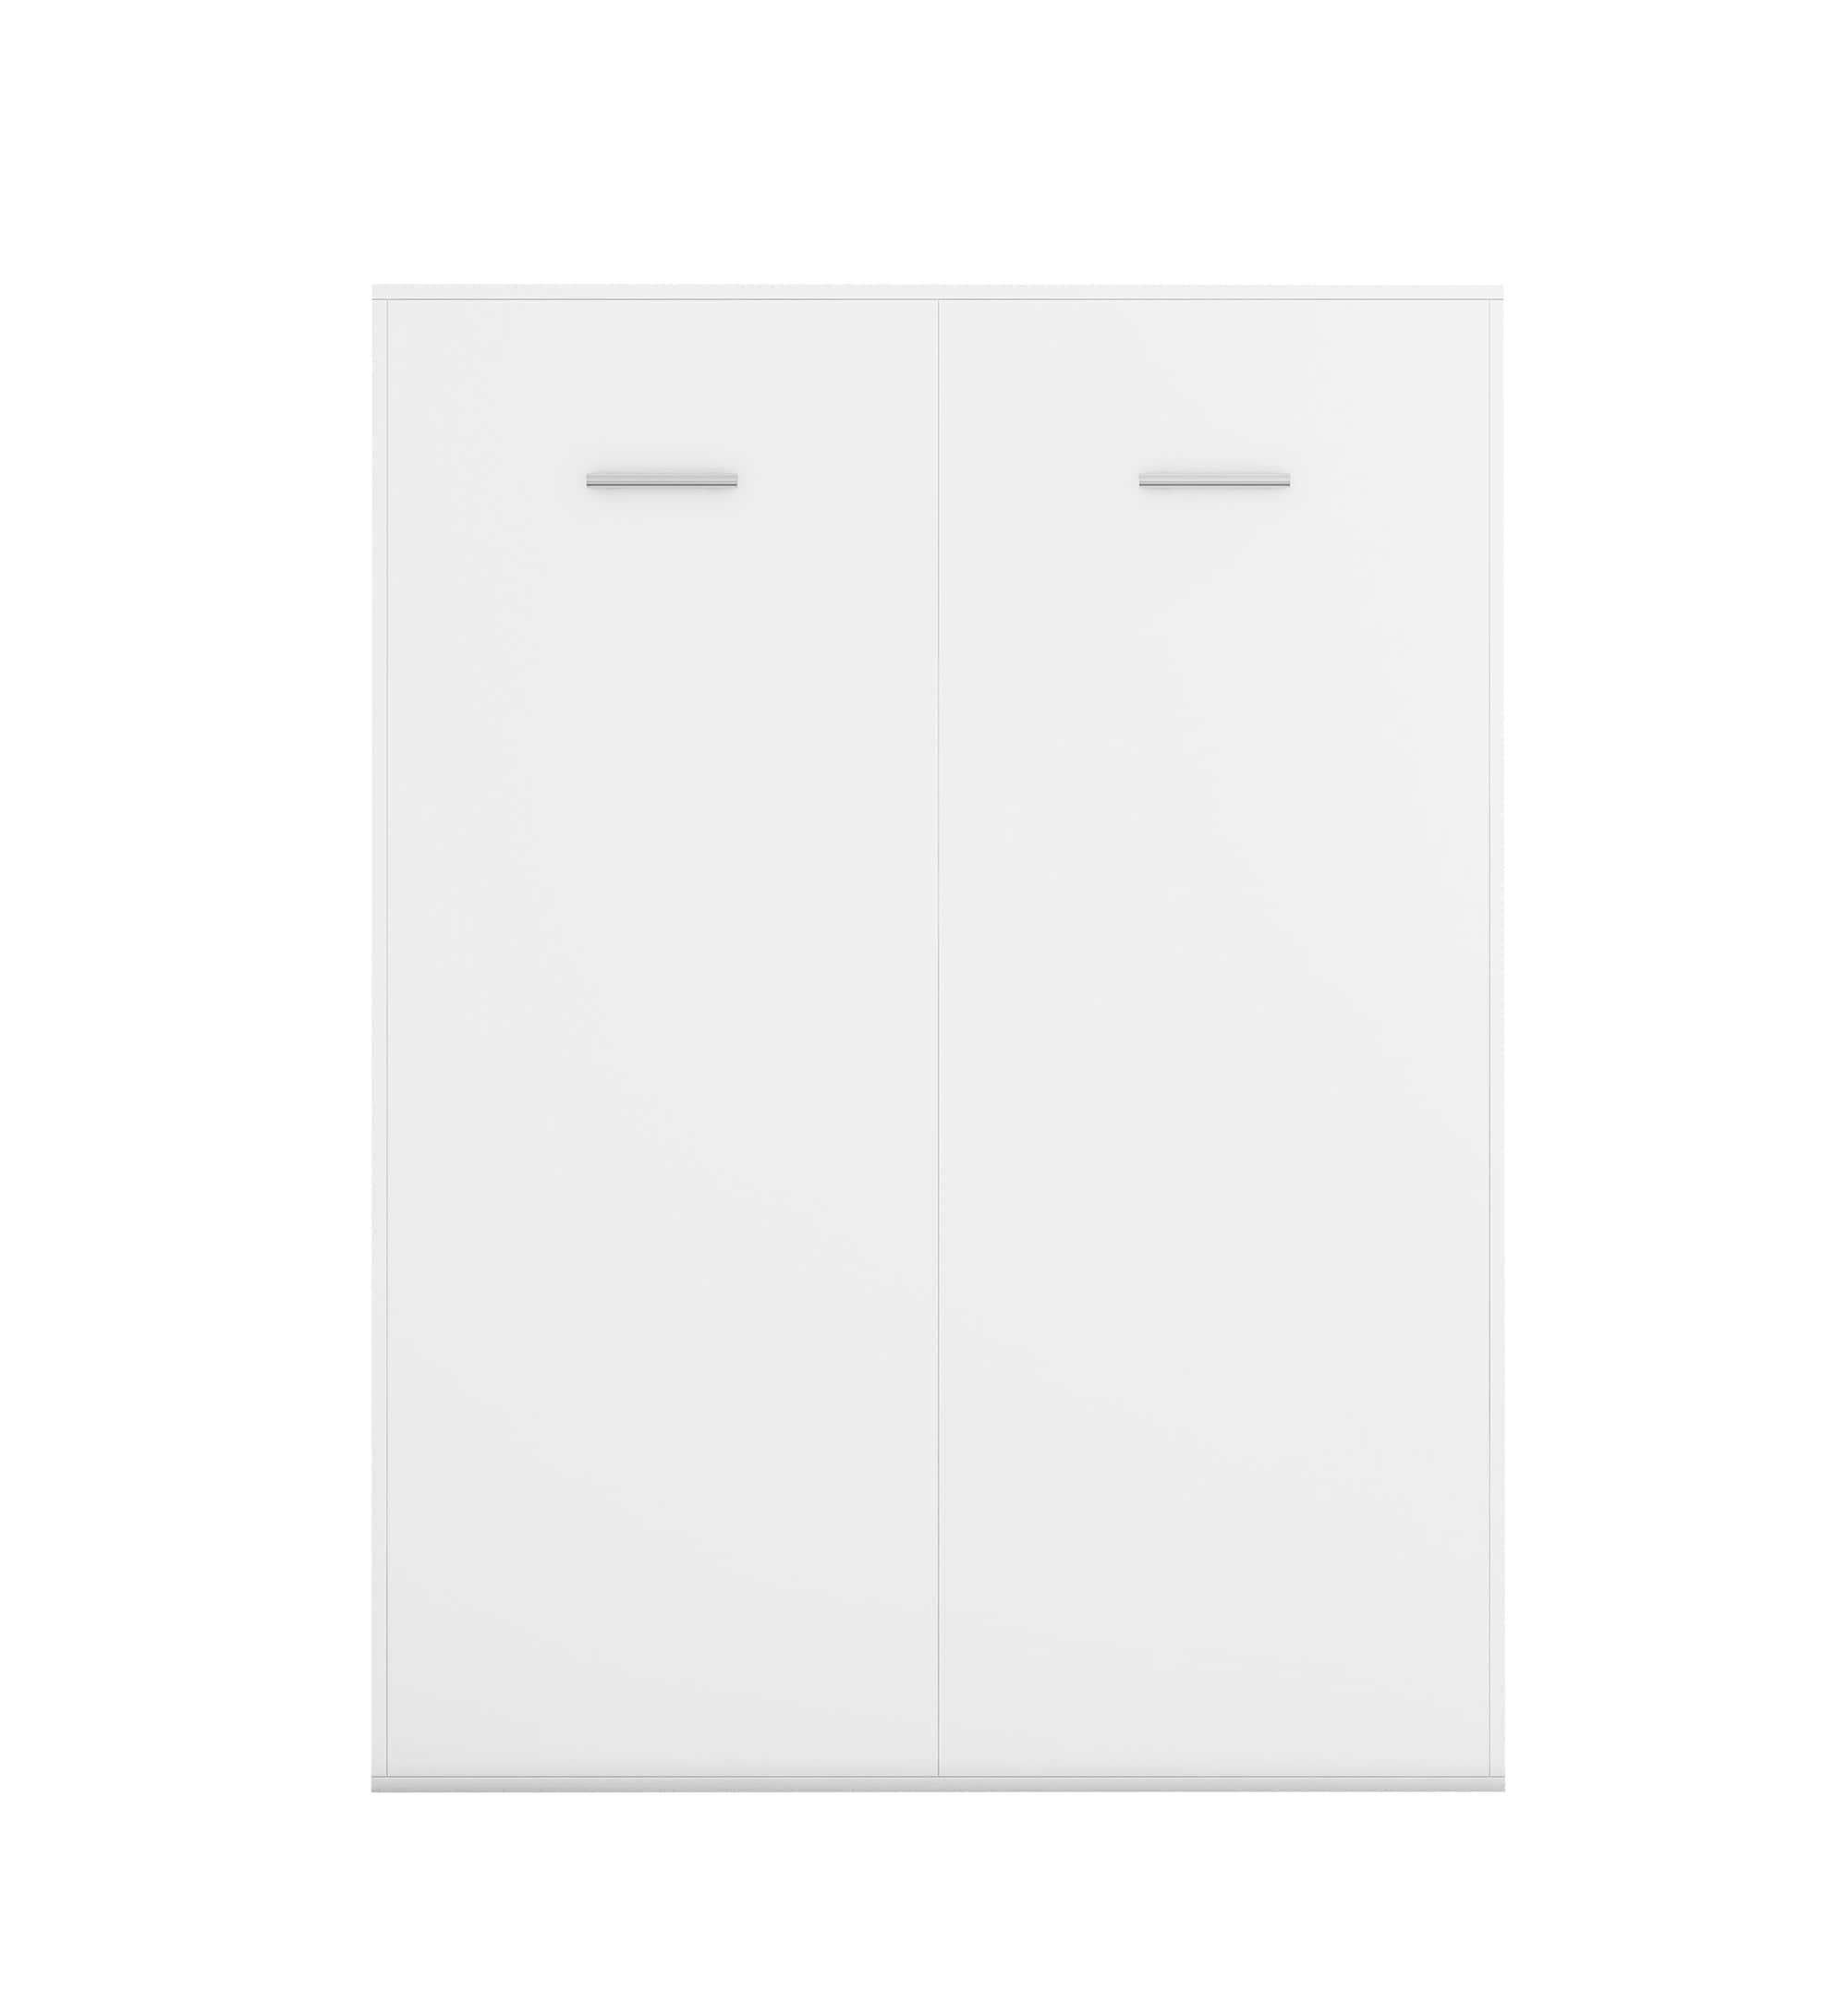 True Contemporary Murphy Wall Bed Full Wallie White Vertical Murphy Wall Pull Down Bed - Available in 3 Sizes